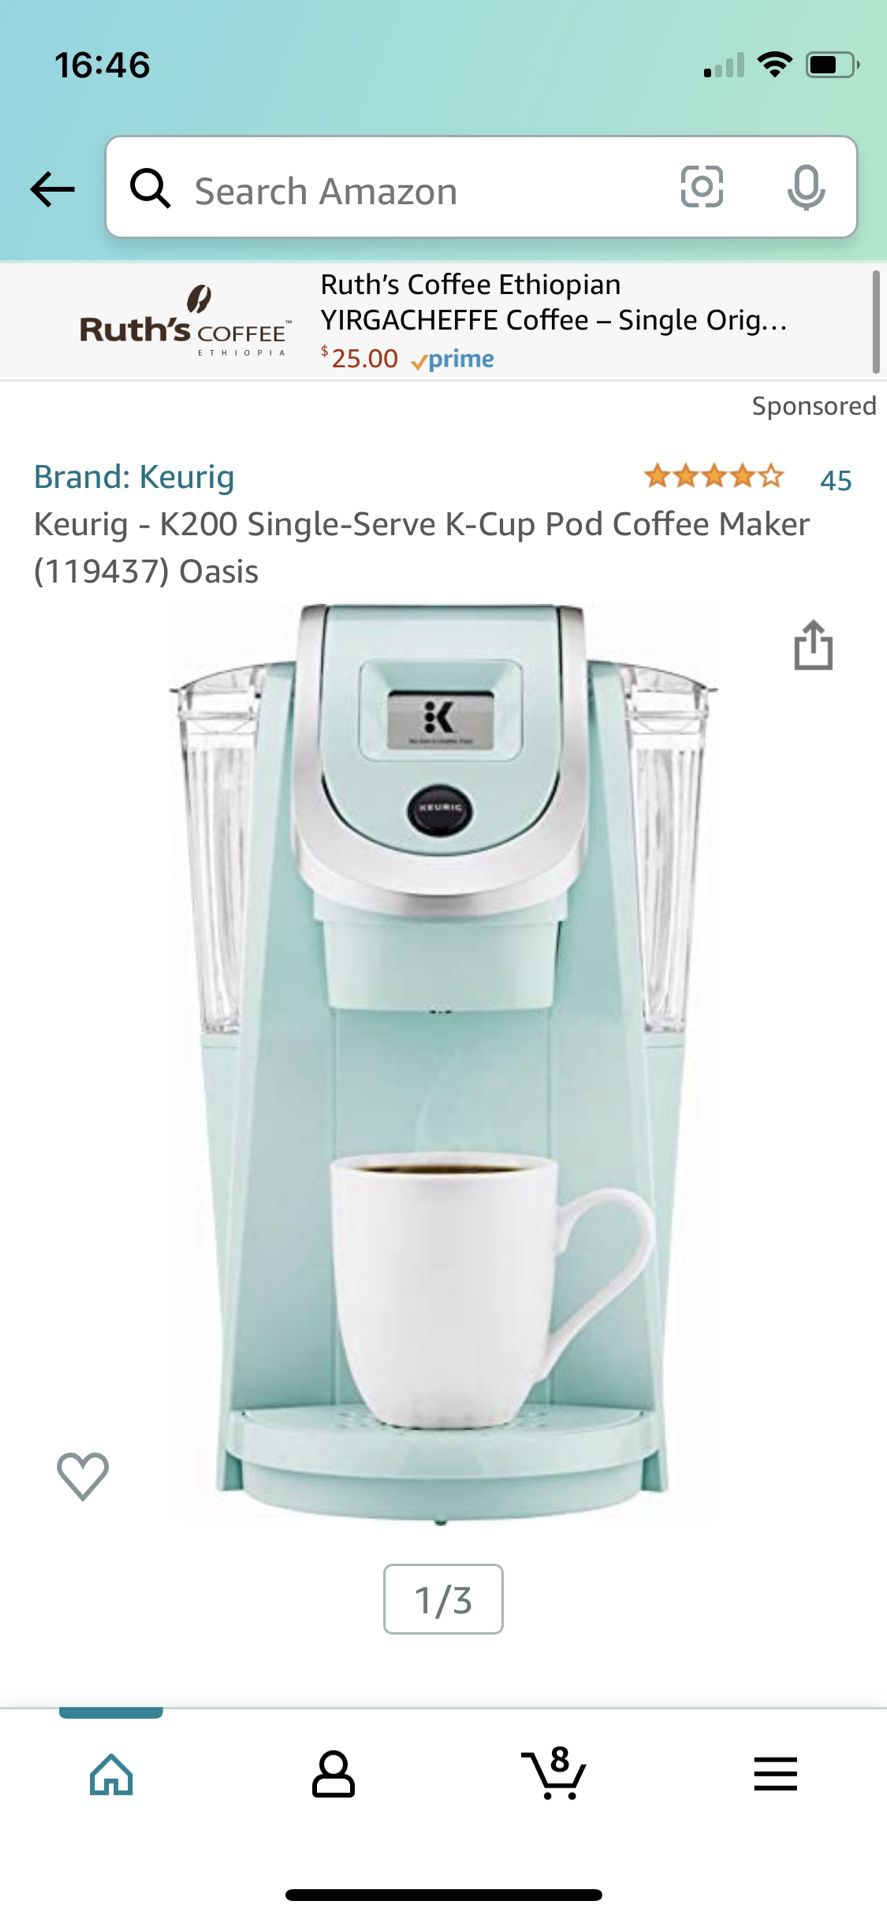 Keurig - K-Duo Plus 12-Cup Coffee Maker and Single Serve K-Cup Brewer -  Black for Sale in Irvine, CA - OfferUp